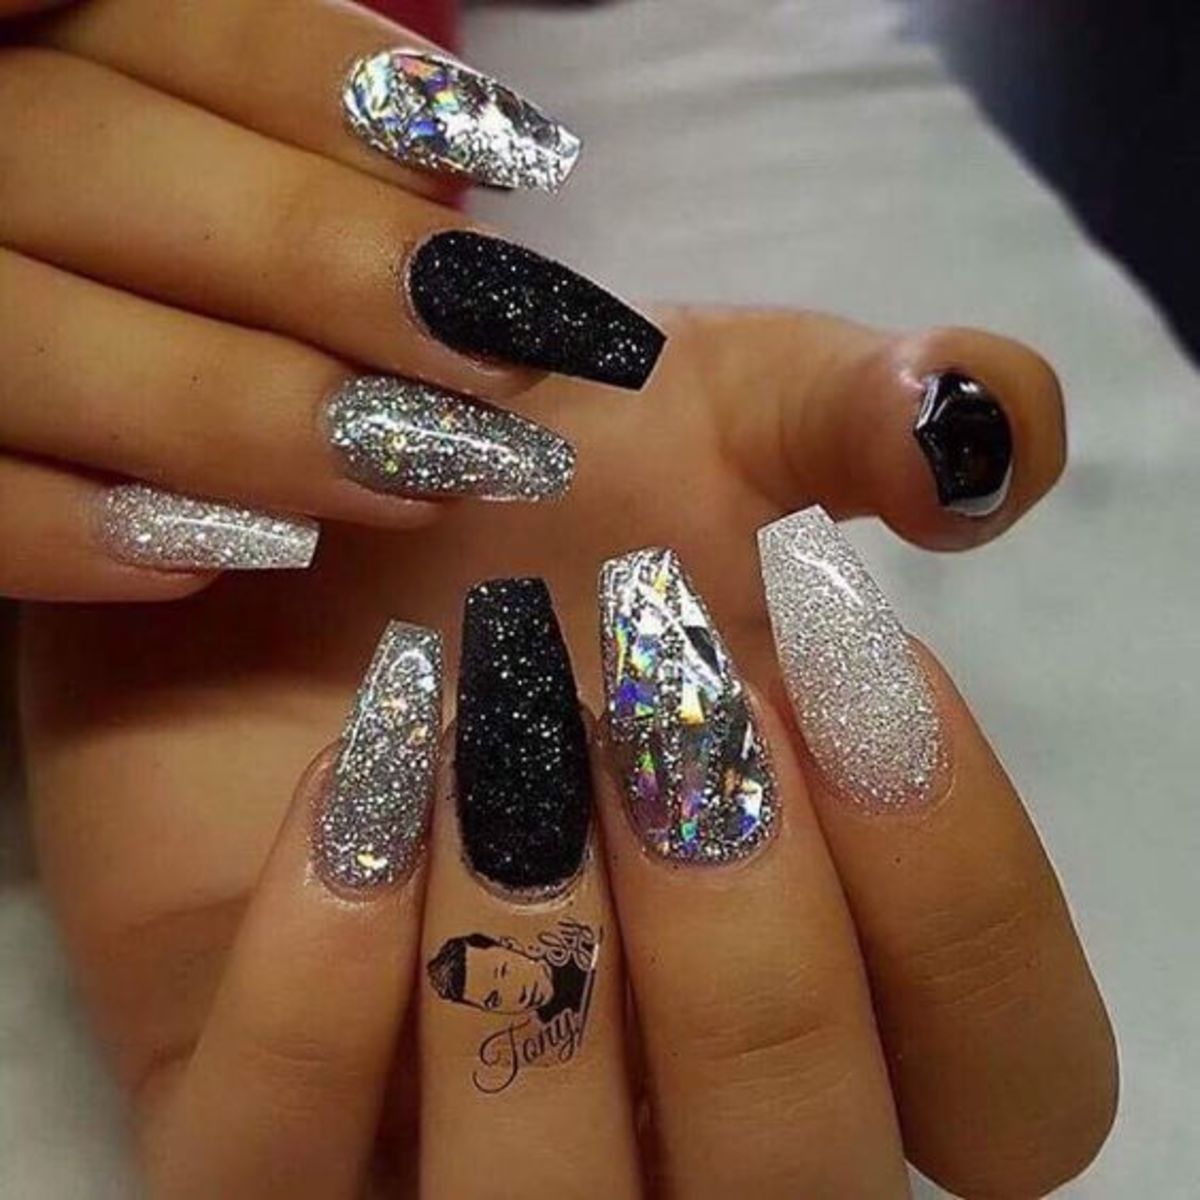 32 Nails Ideas So Cute You Can't Wait To Get Your Next Manicure Appointment  | FPN